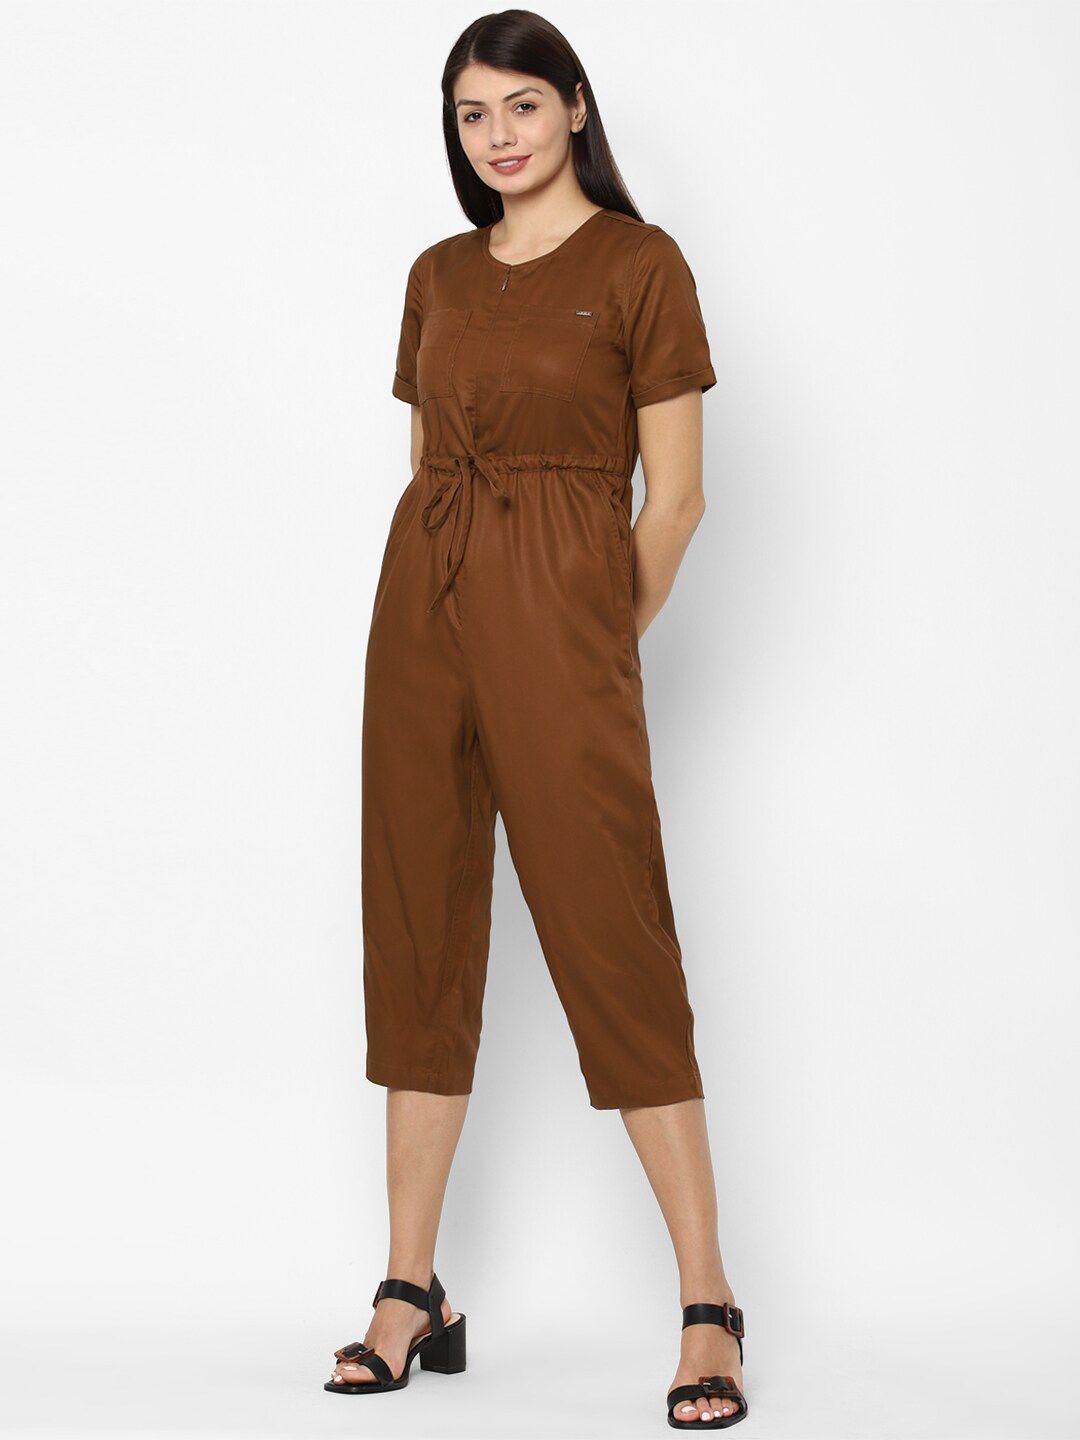 allen solly woman brown solid tencel basic jumpsuit